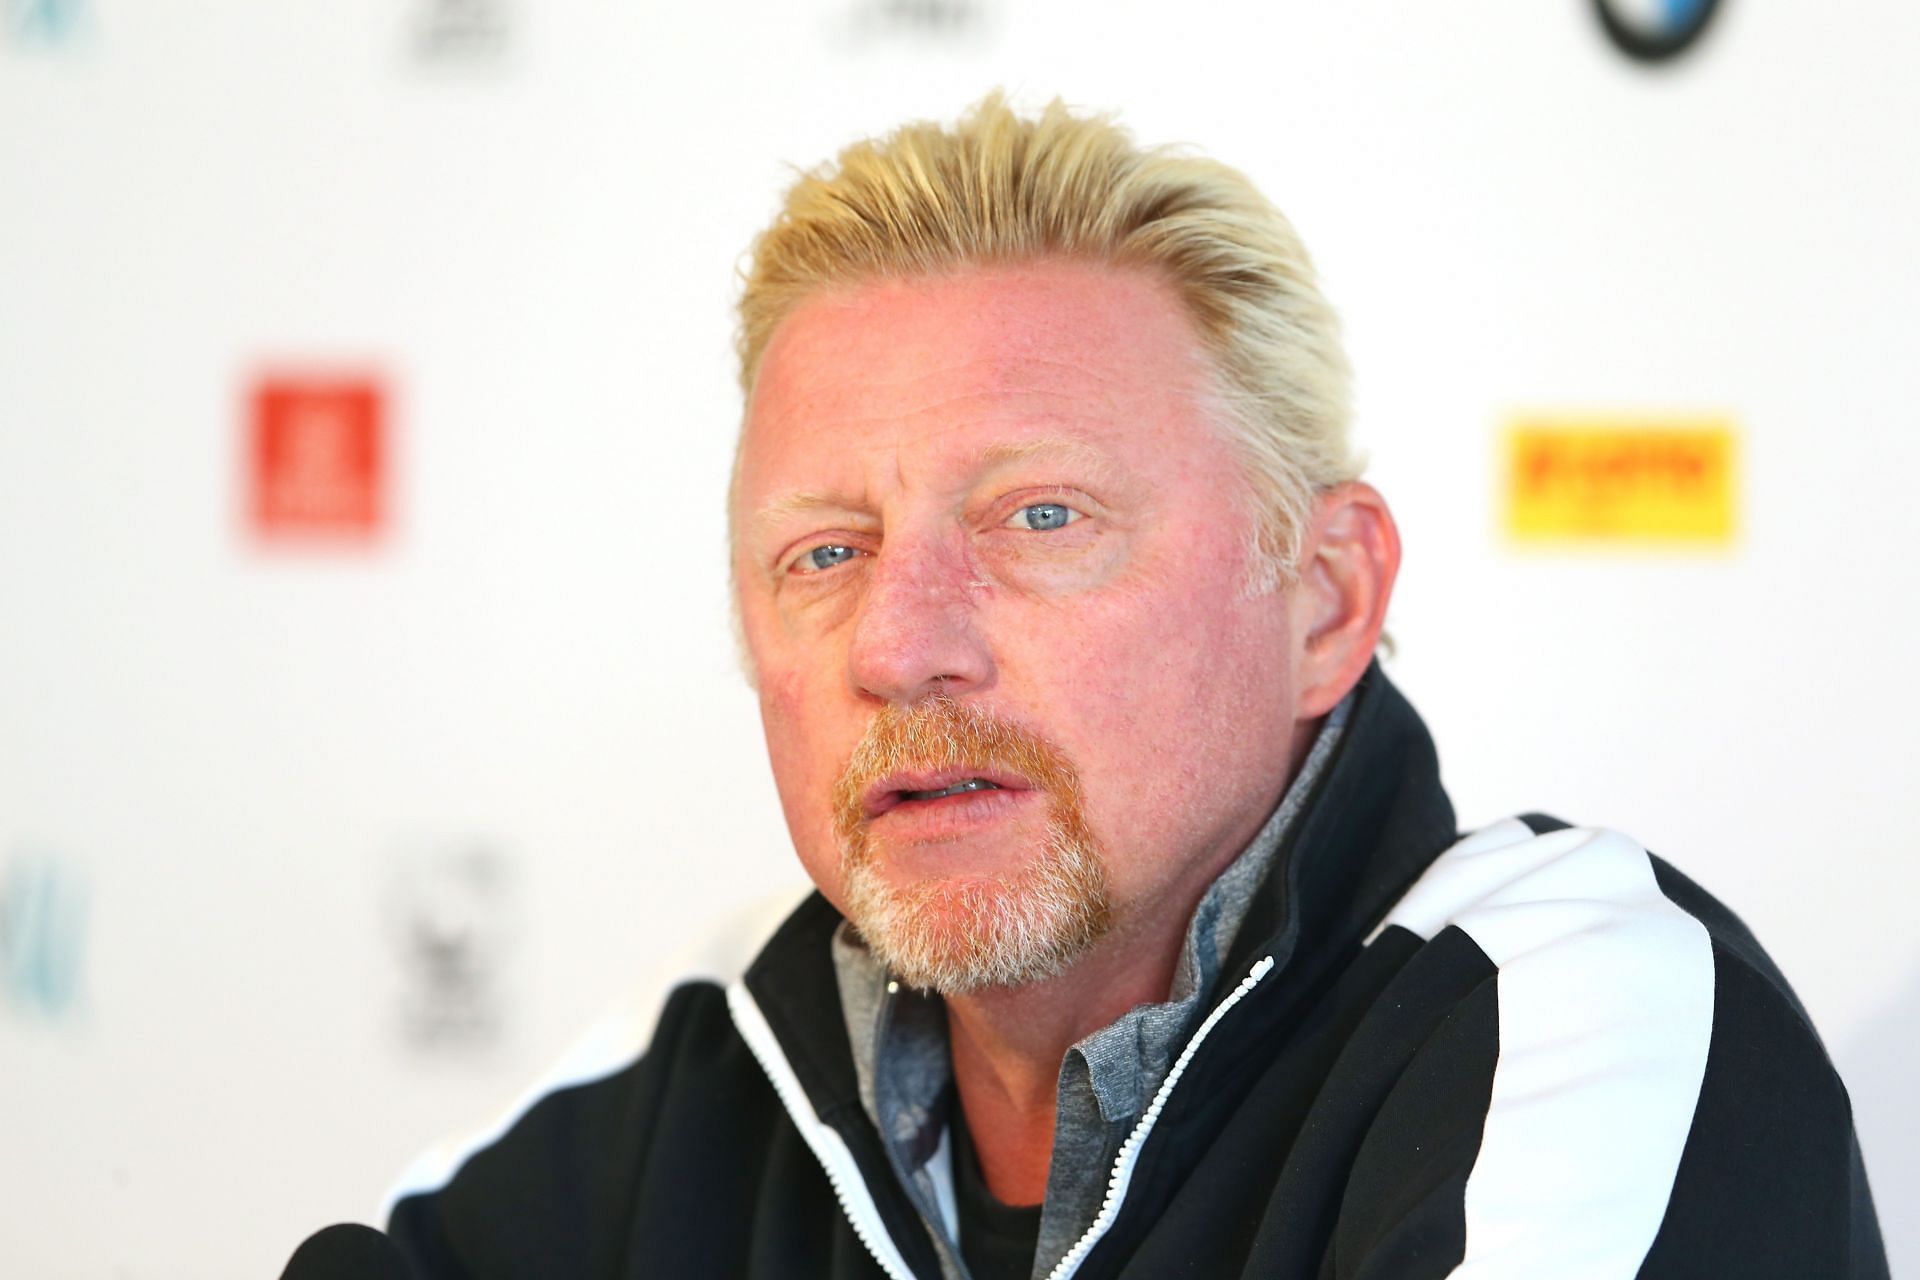 Chris Evert believes Boris Becker has &quot;paid his dues&quot; after spending eight months in prison